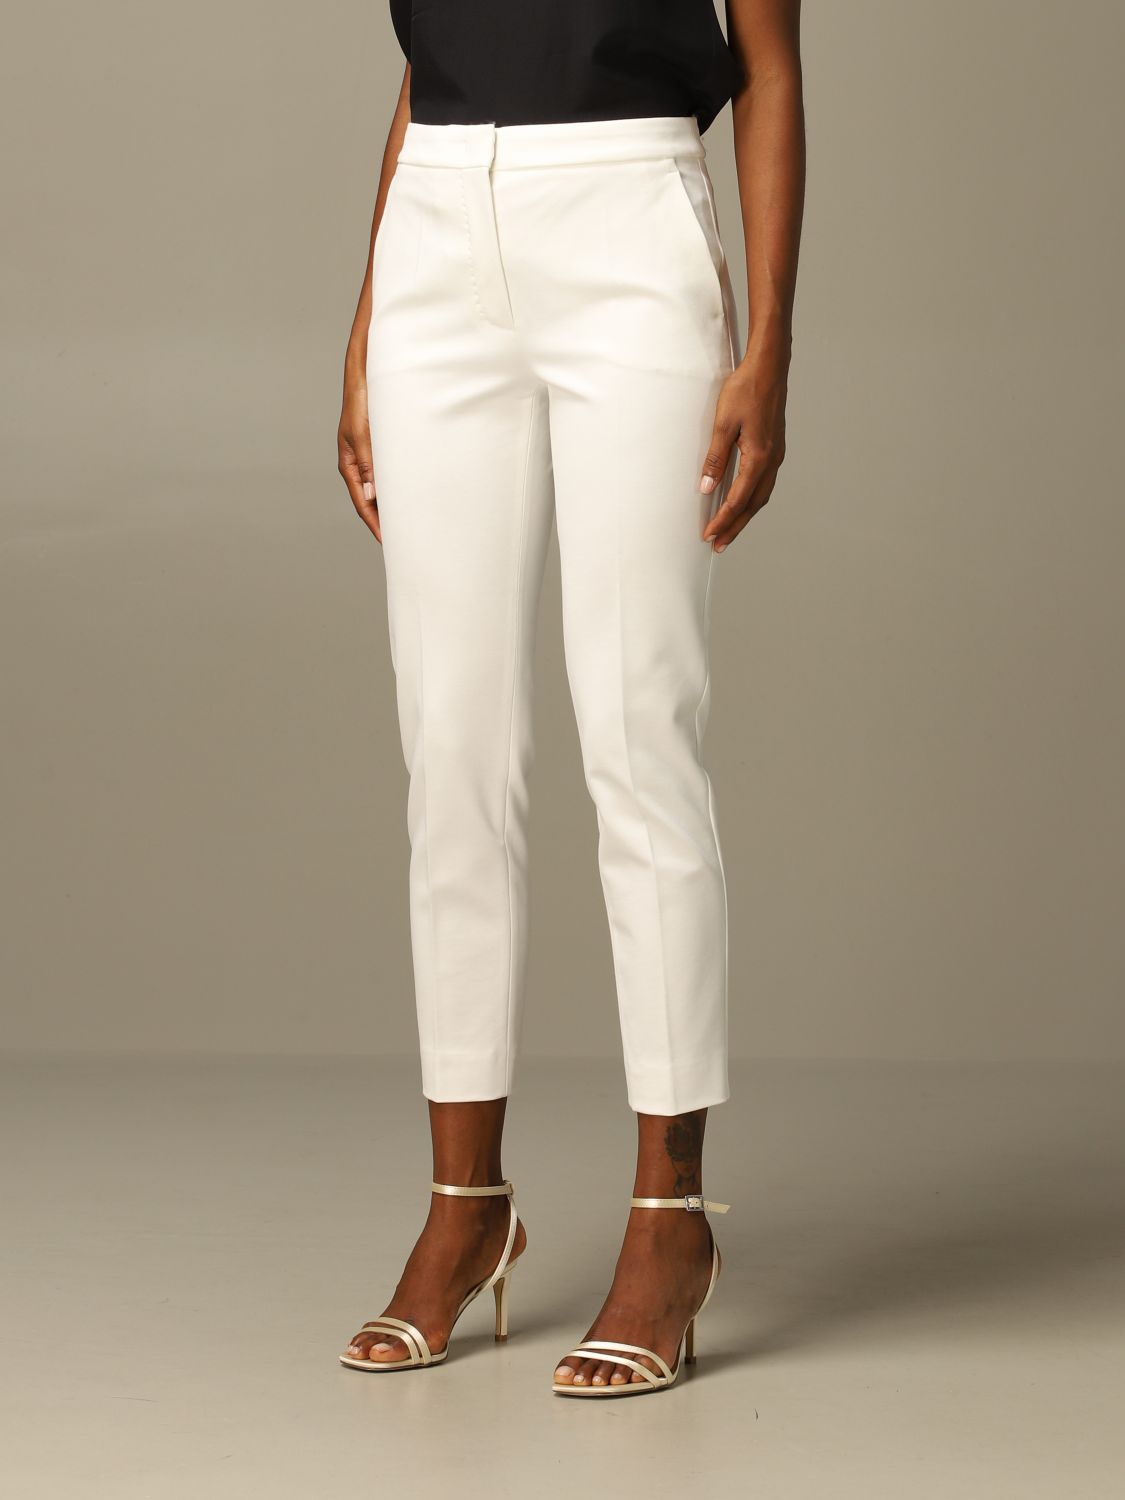 Max Mara Outlet: Pegno trousers in slim fit cotton jersey - White